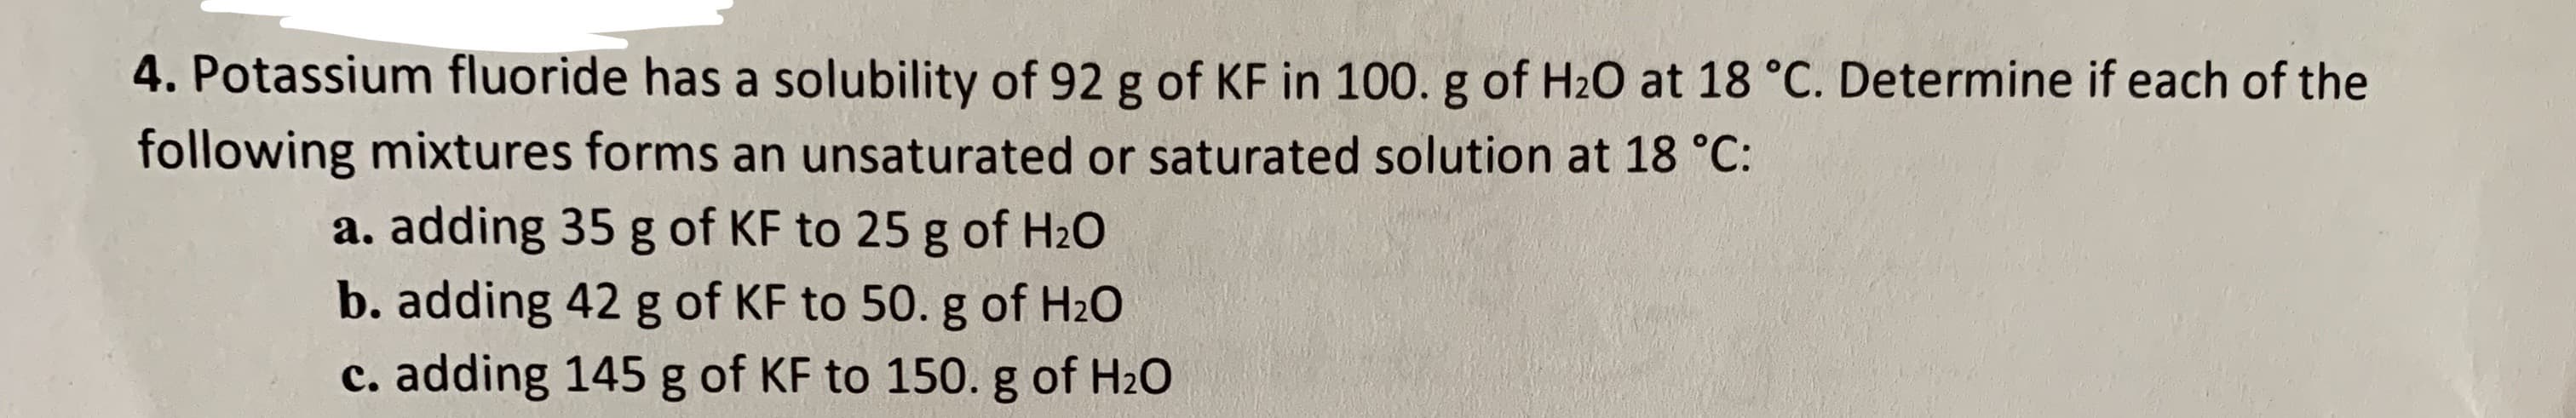 4. Potassium fluoride has a solubility of 92 g of KF in 100. g of H20 at 18 °C. Determine if each of the
following mixtures forms an unsaturated or saturated solution at 18 °C:
a. adding 35 g of KF to 25 g of H2O
b. adding 42 g of KF to 50. g of H2O
c. adding 145 g of KF to 150. g of H20
